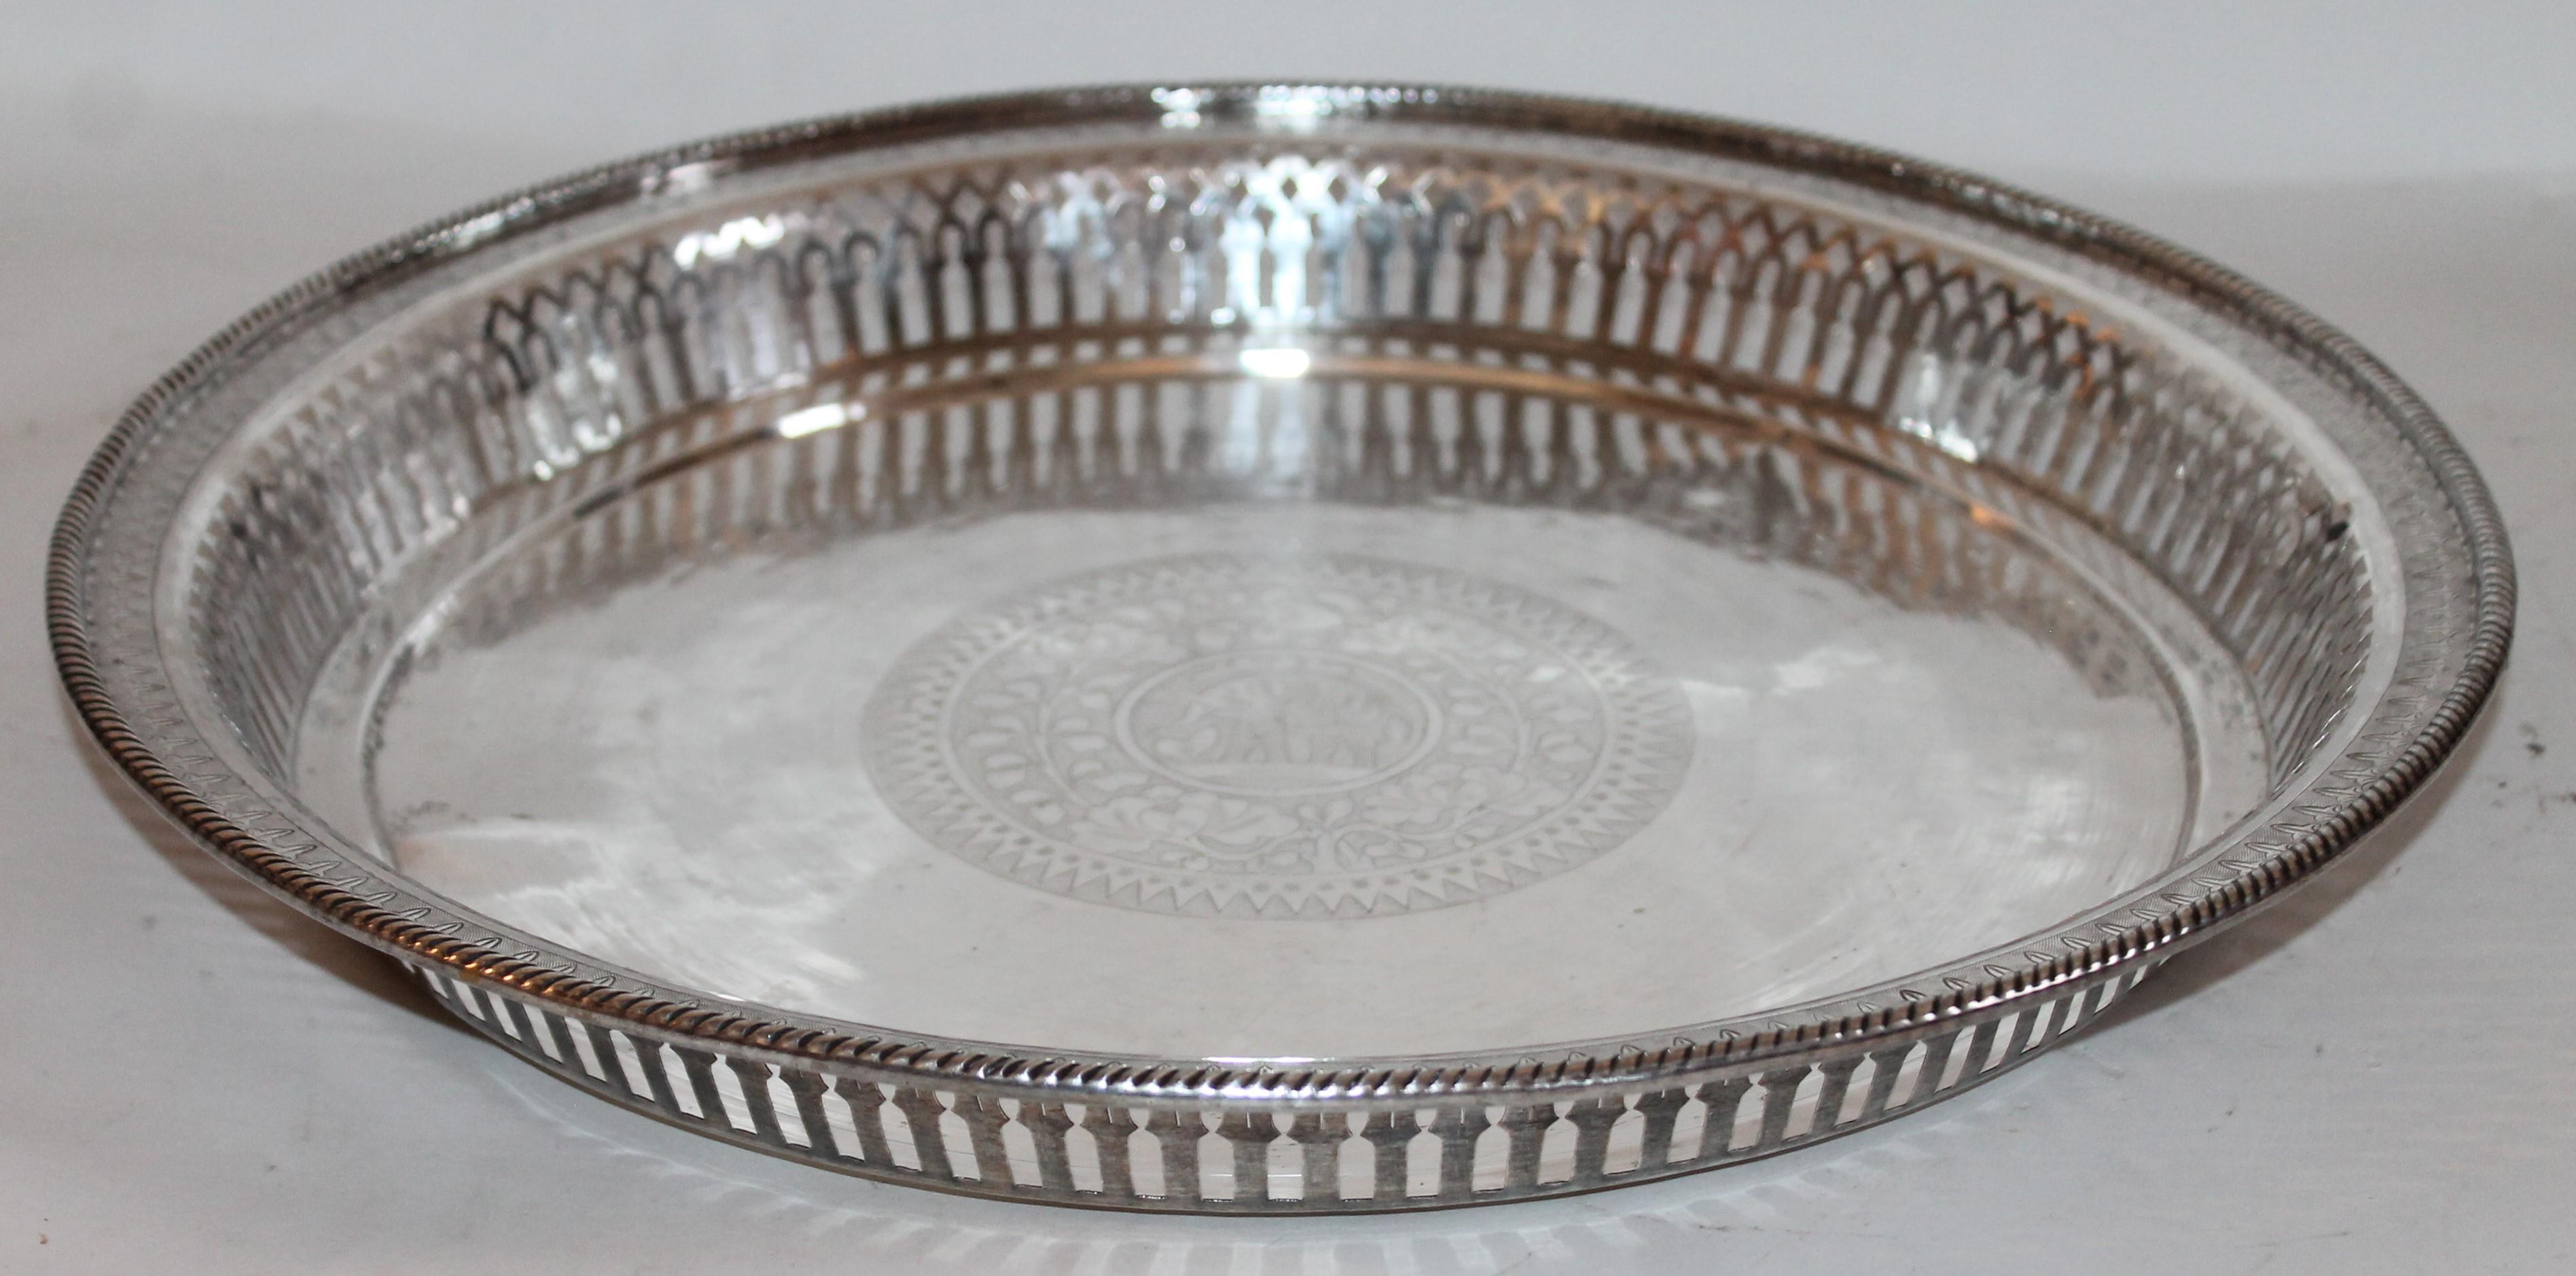 This fantastic 800 silver serving tray is in fine condition and has a embossed elephant in the center of the tray. Polishes up very nicely. Great cocktail tray.